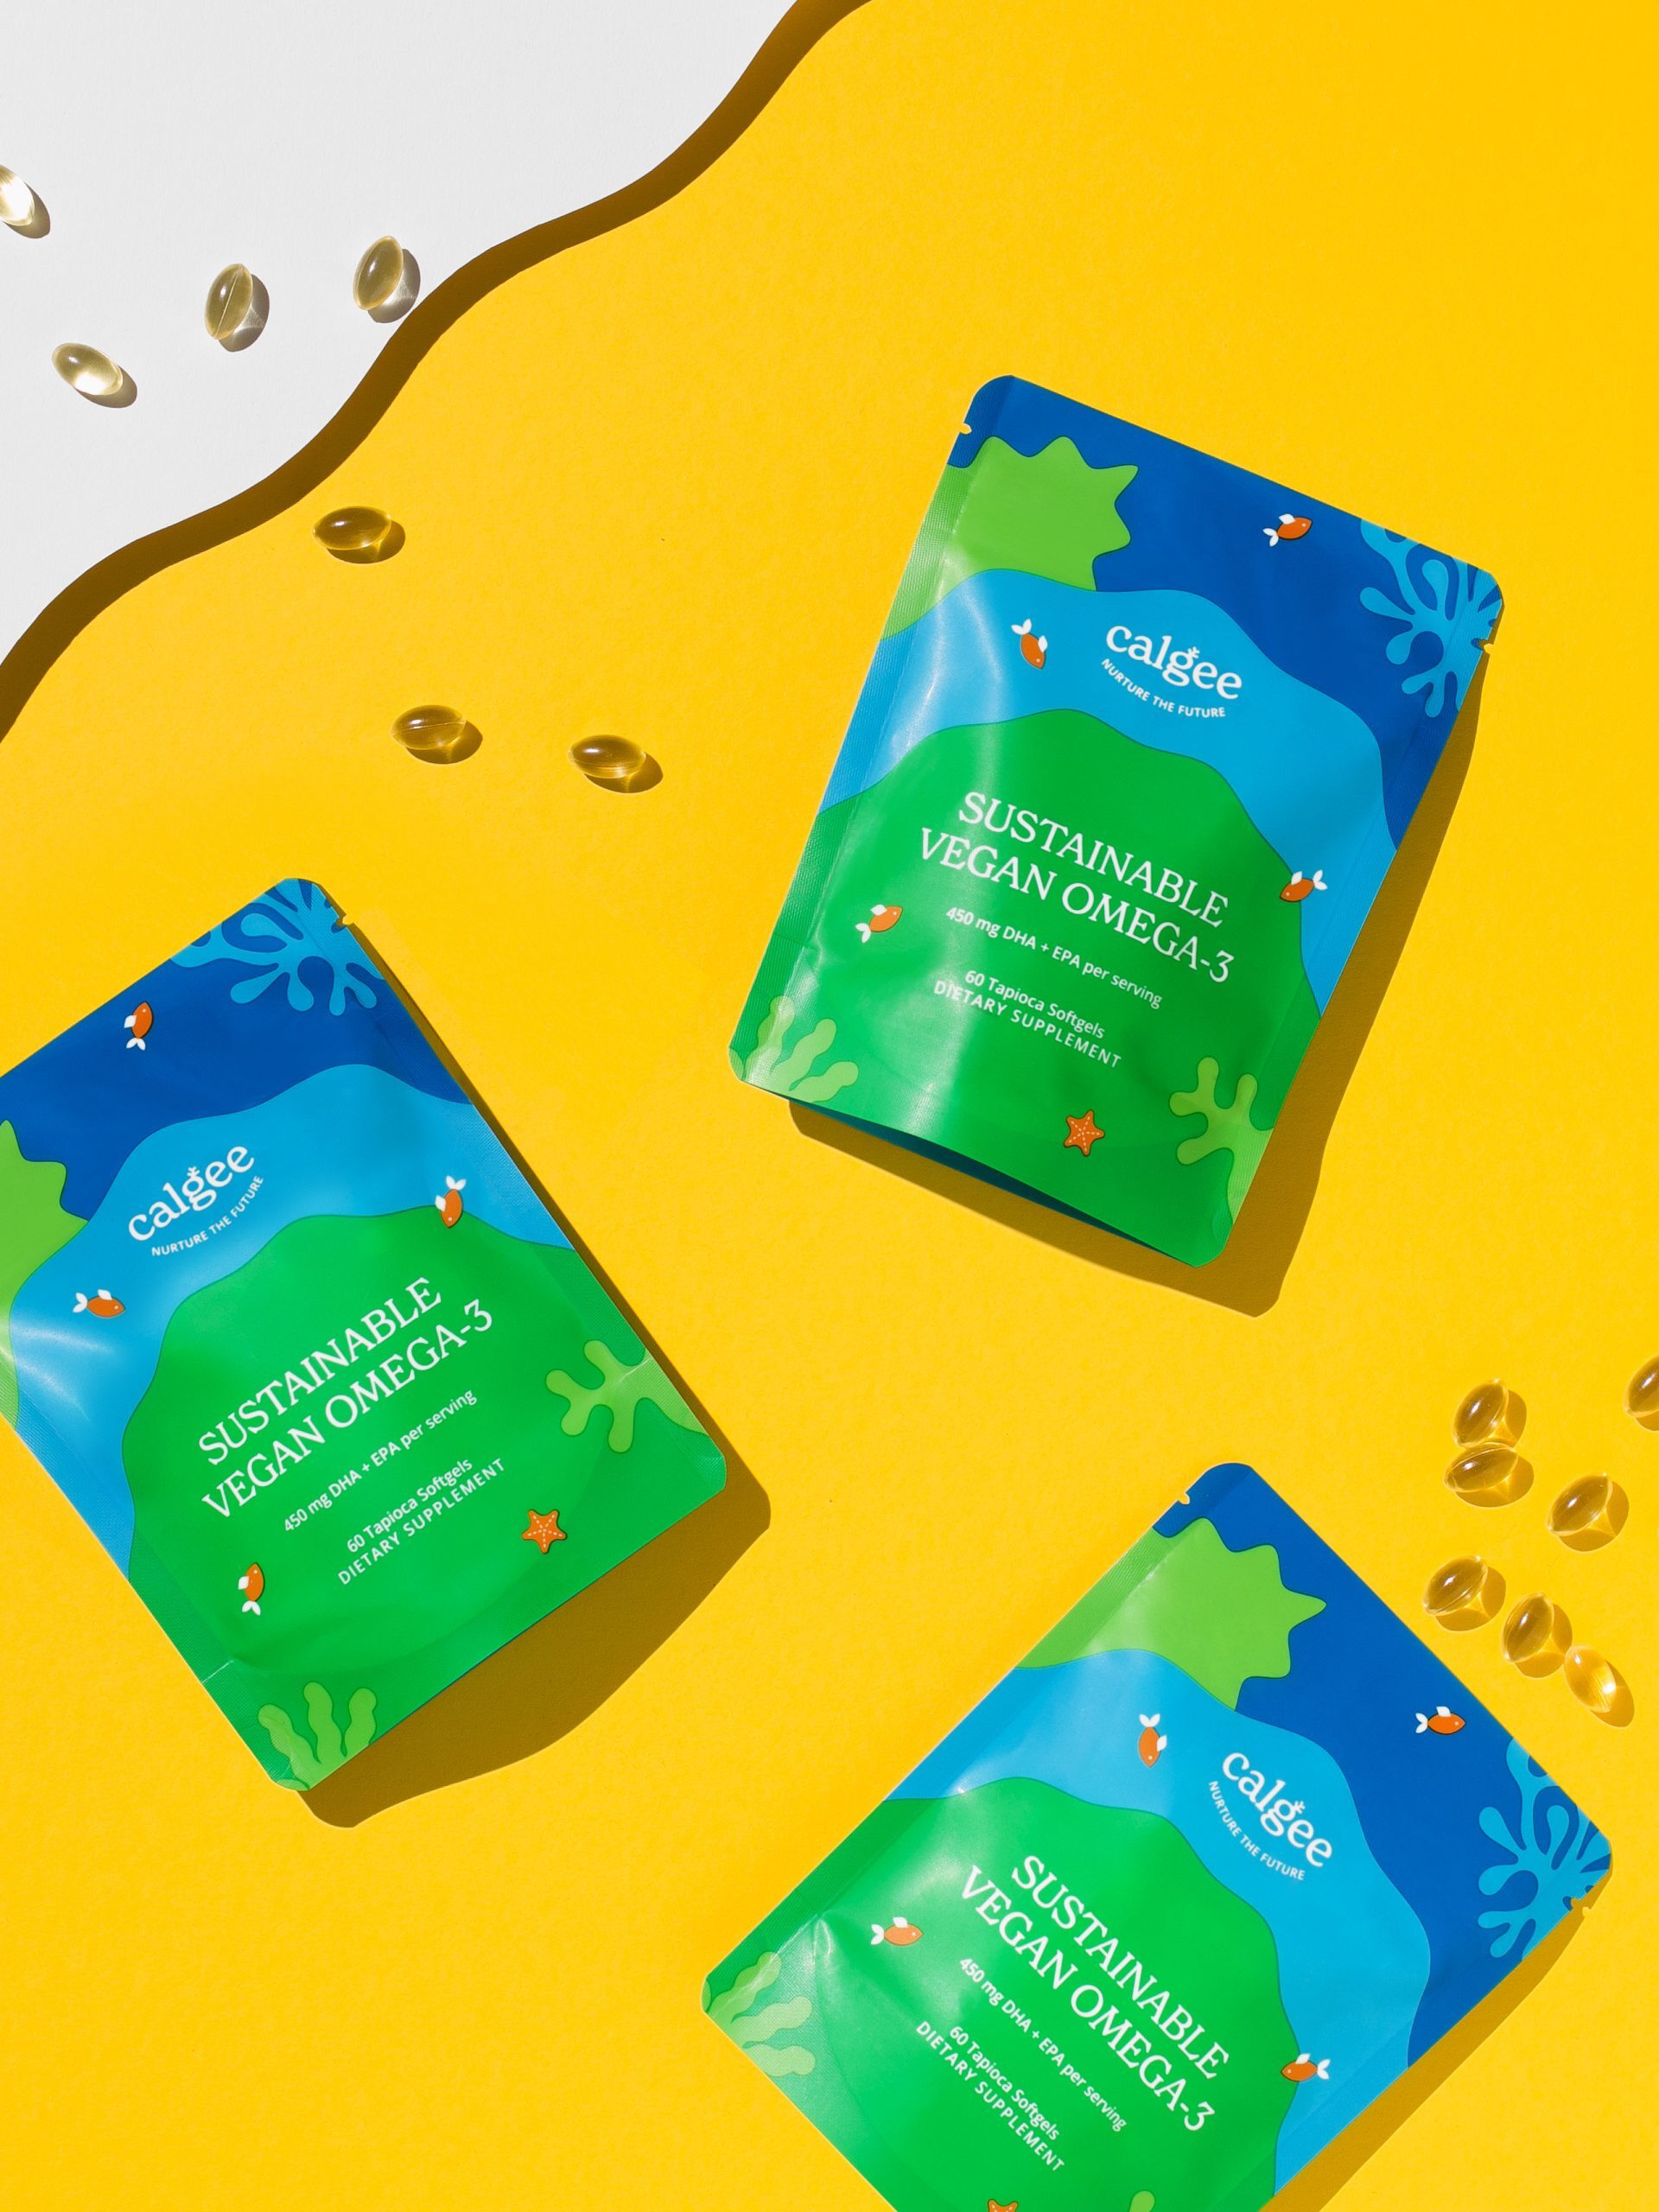 Three brightly colored packets labeled "Sustainable Vegan Omega-3" lie on a yellow surface, surrounded by scattered omega-3 capsules.